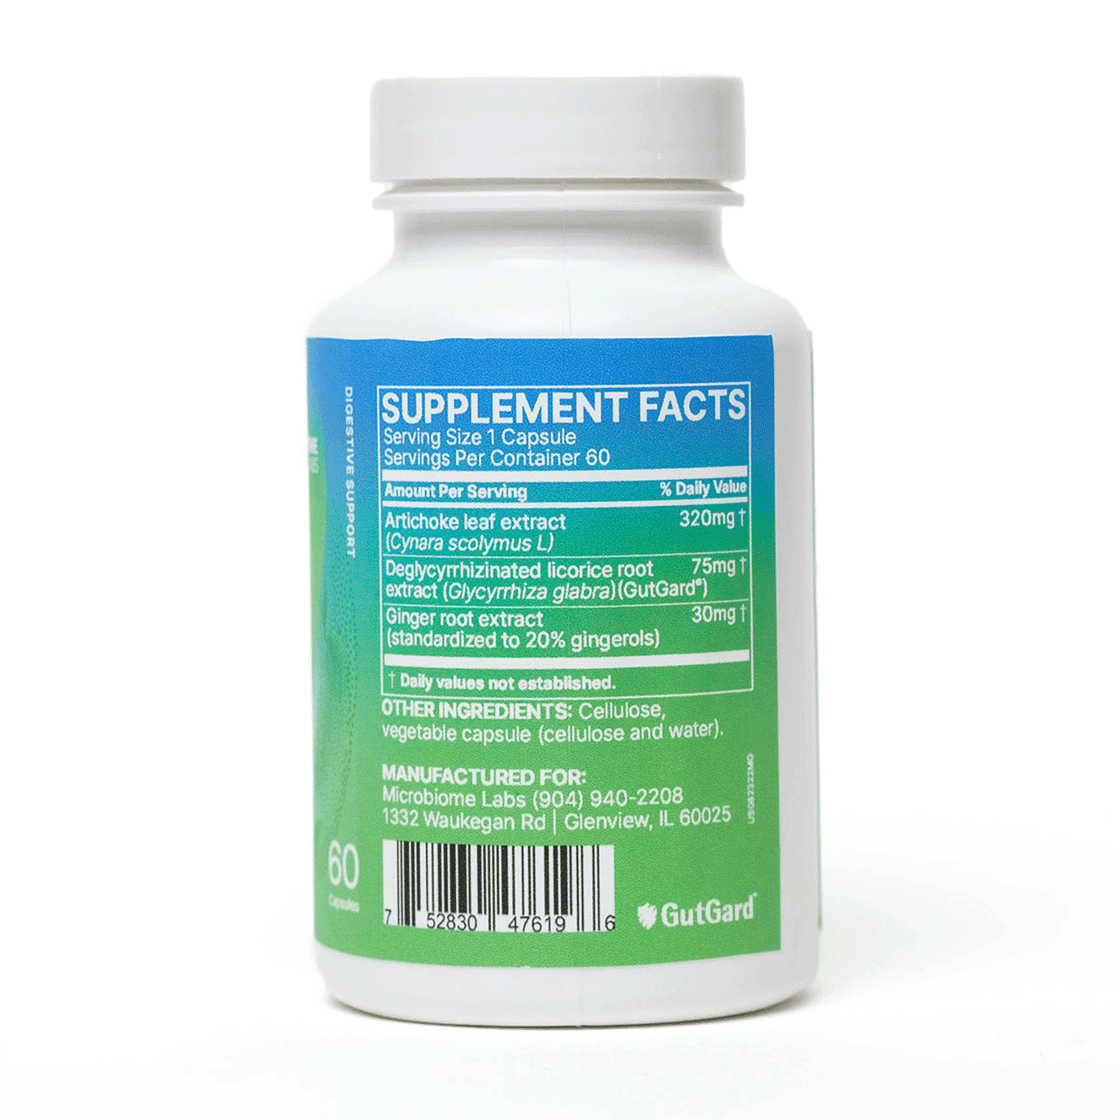 MegaGuard by Microbiome Labs Supplement Facts